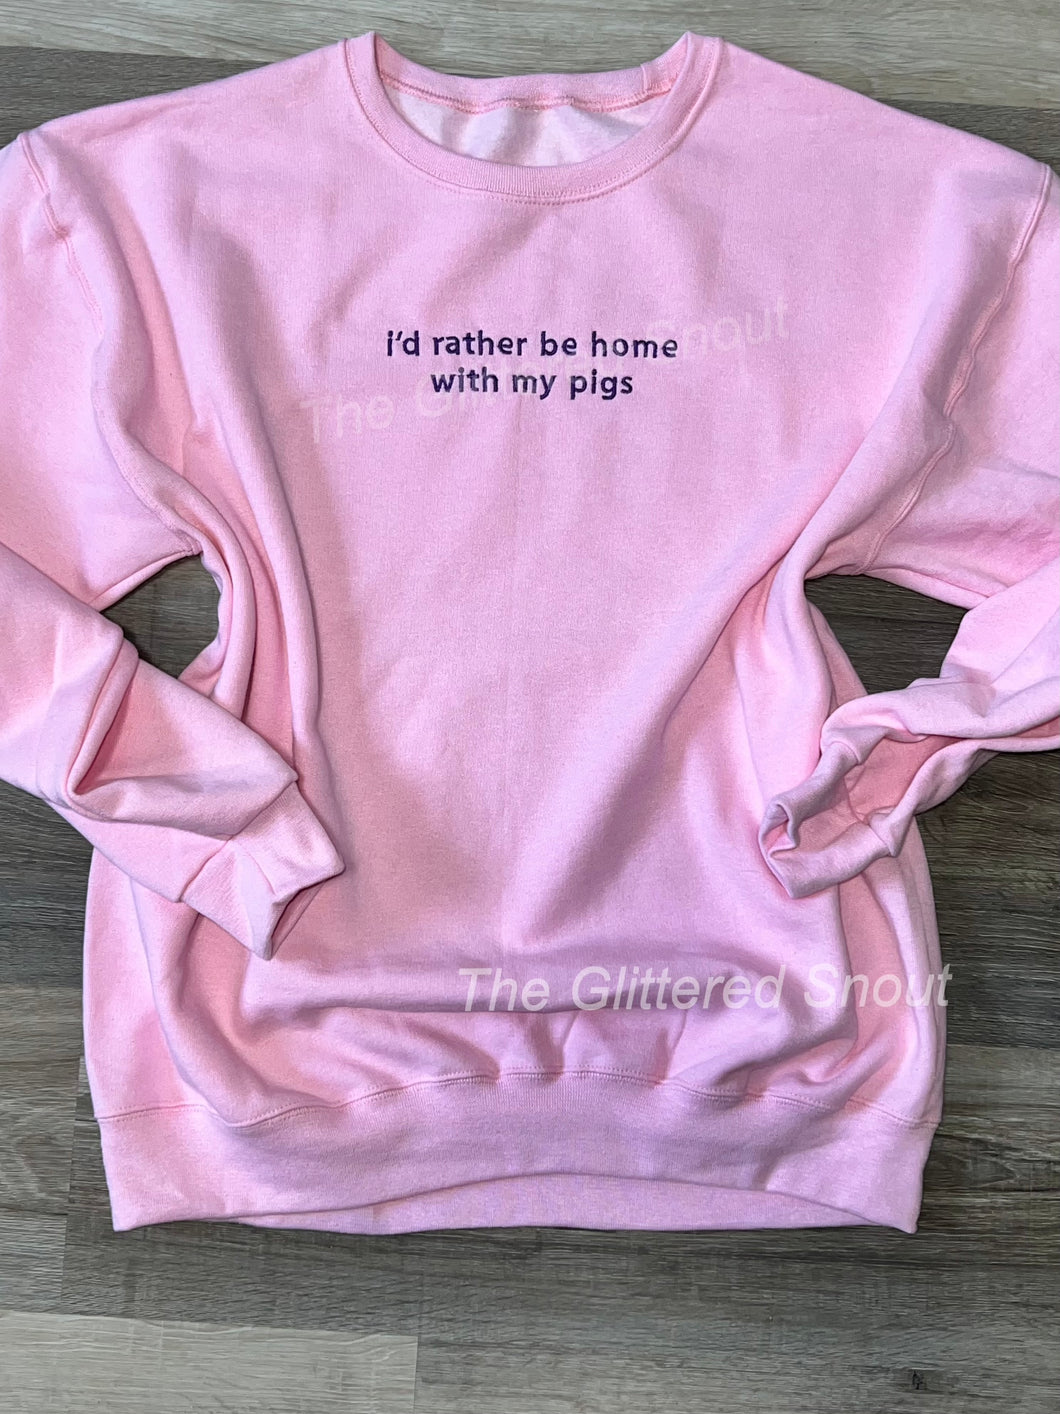 Embroidered crew or sweatshirt- “i’d rather be home with my pigs”